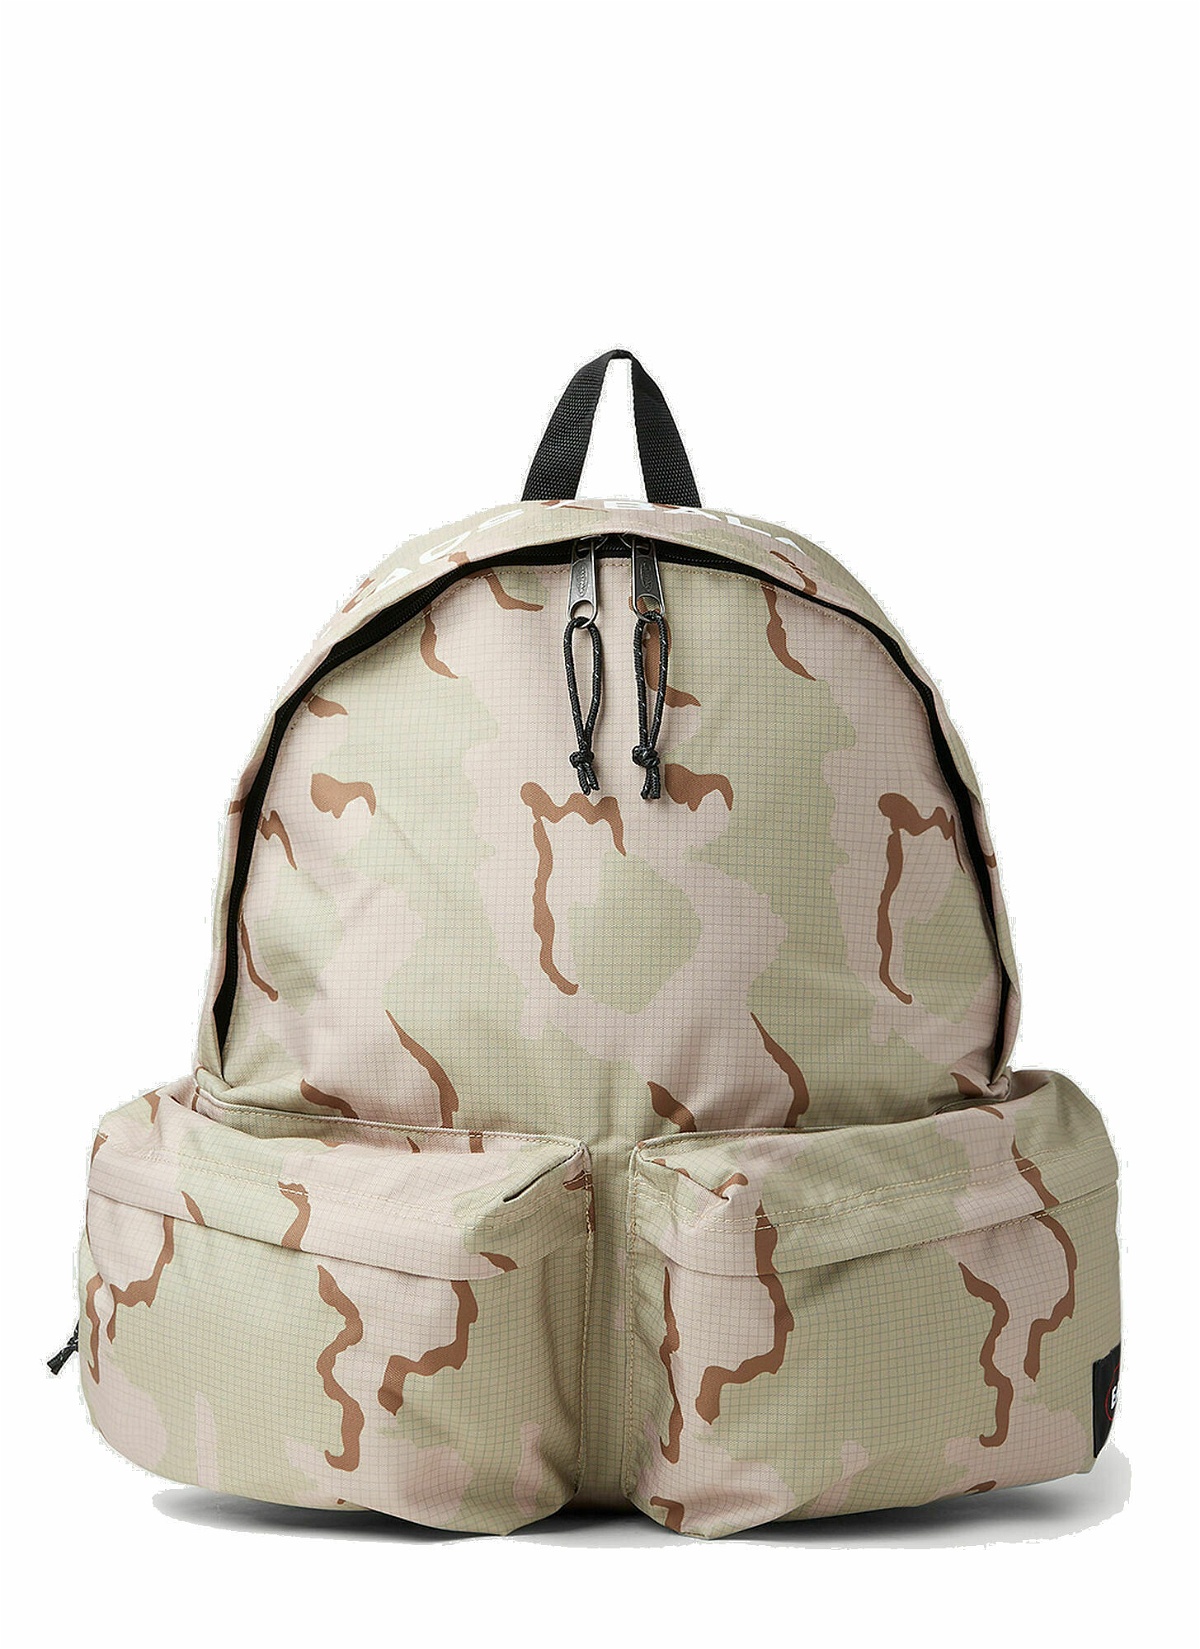 Photo: Eastpak x UNDERCOVER - Camouflage Backpack in Beige